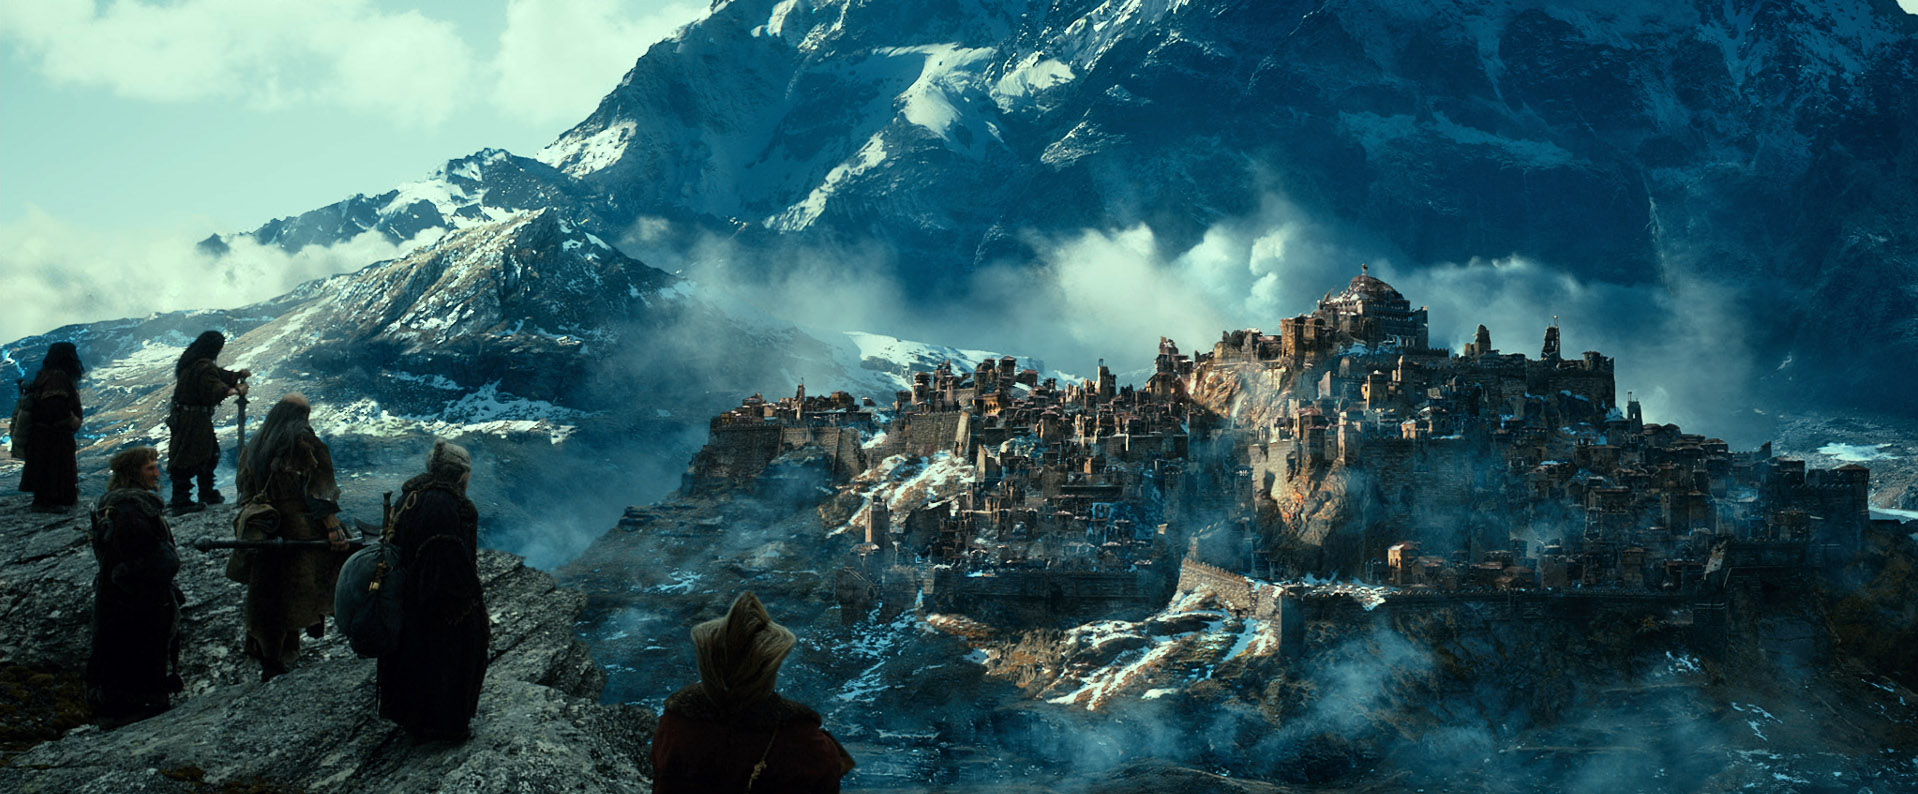 new-image-from-the-hobbit-the-desolation-of-smaug-7.jpg